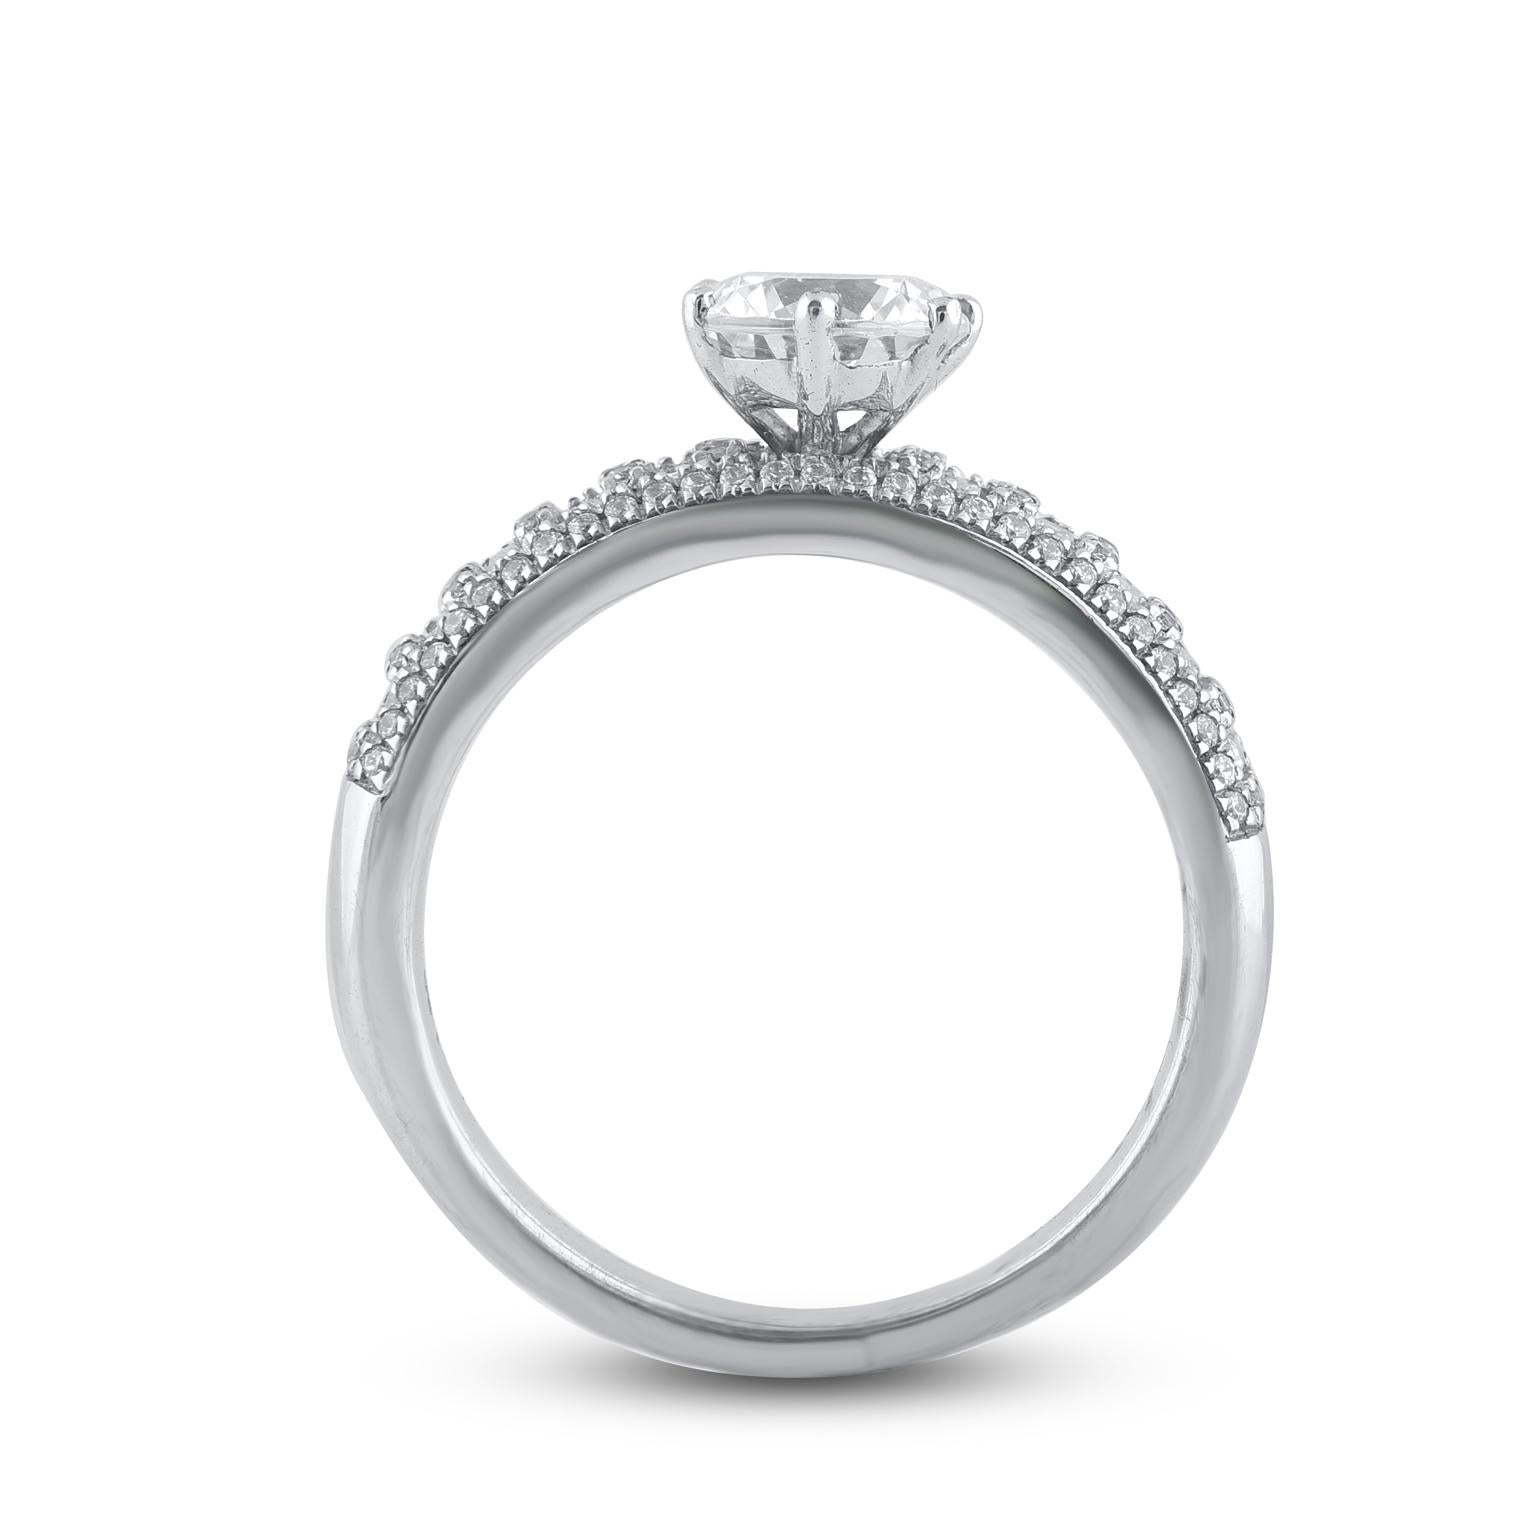 TJD 1.50 Carat Round and Baguette Diamond 14KT White Gold Halo Engagement Ring In New Condition For Sale In New York, NY